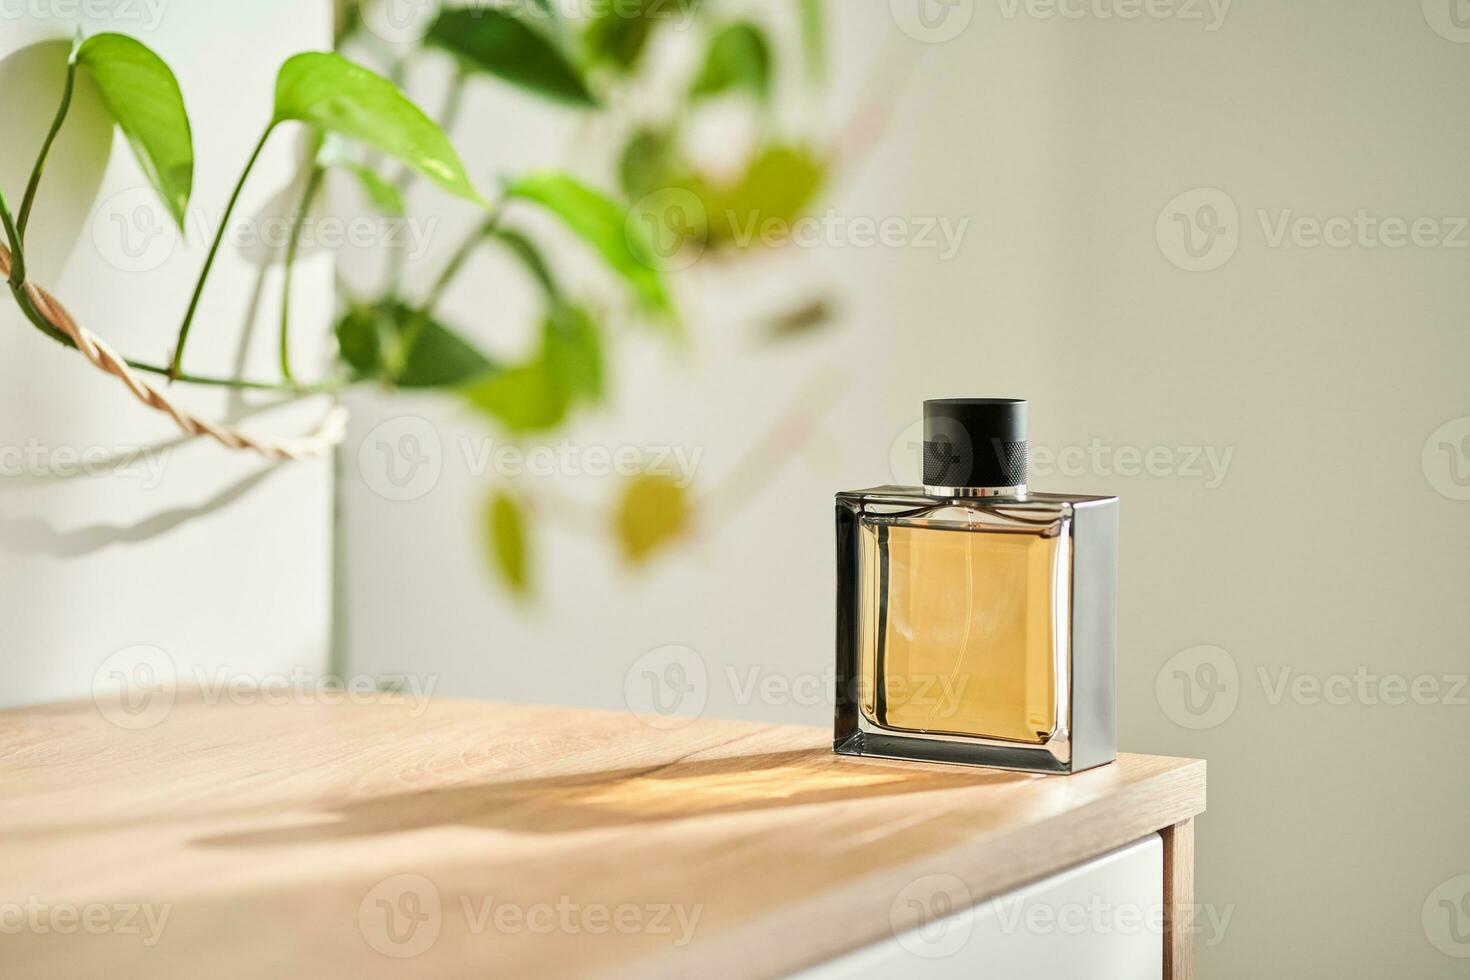 A bottle of perfume in the rays of the sun. photo